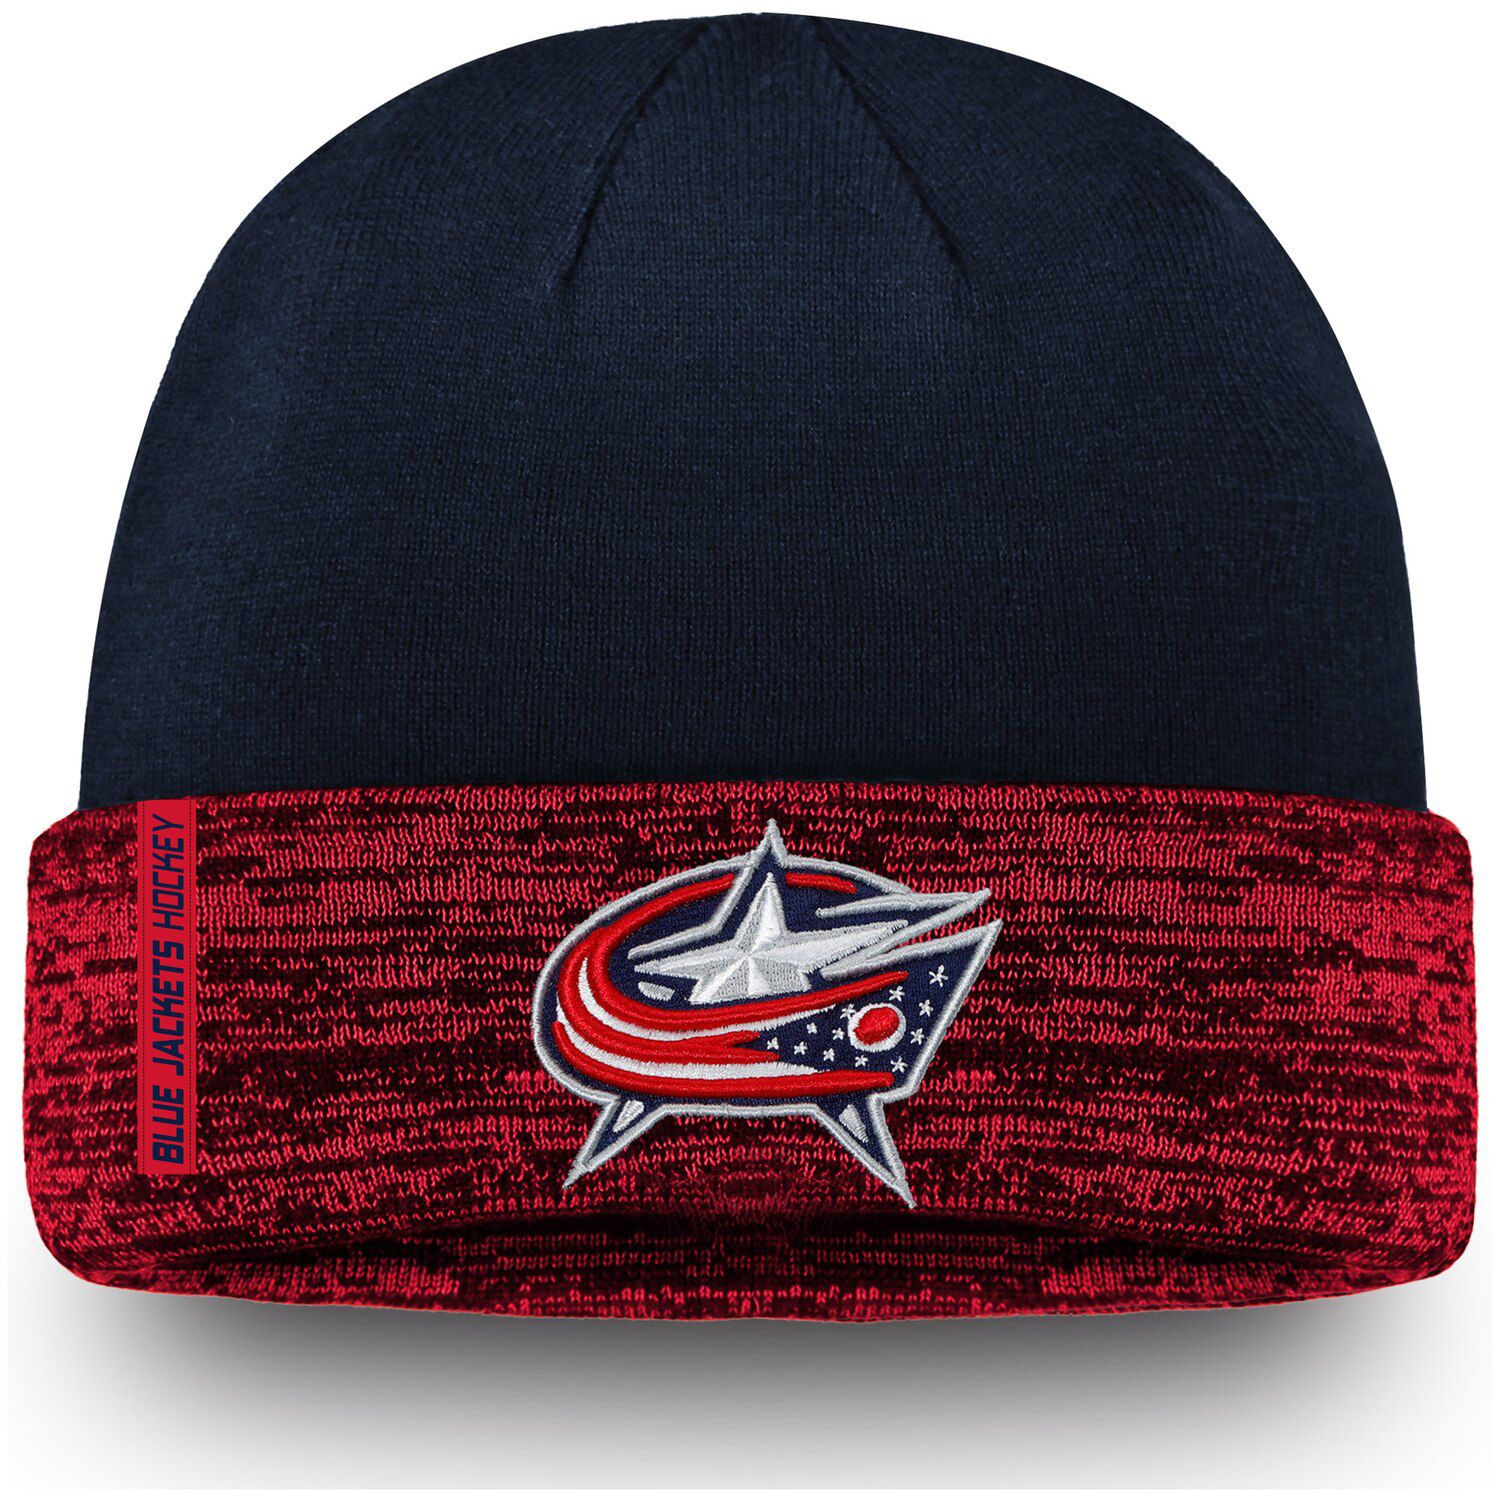 Authentic Pro Rinkside Cuffed Knit Hat